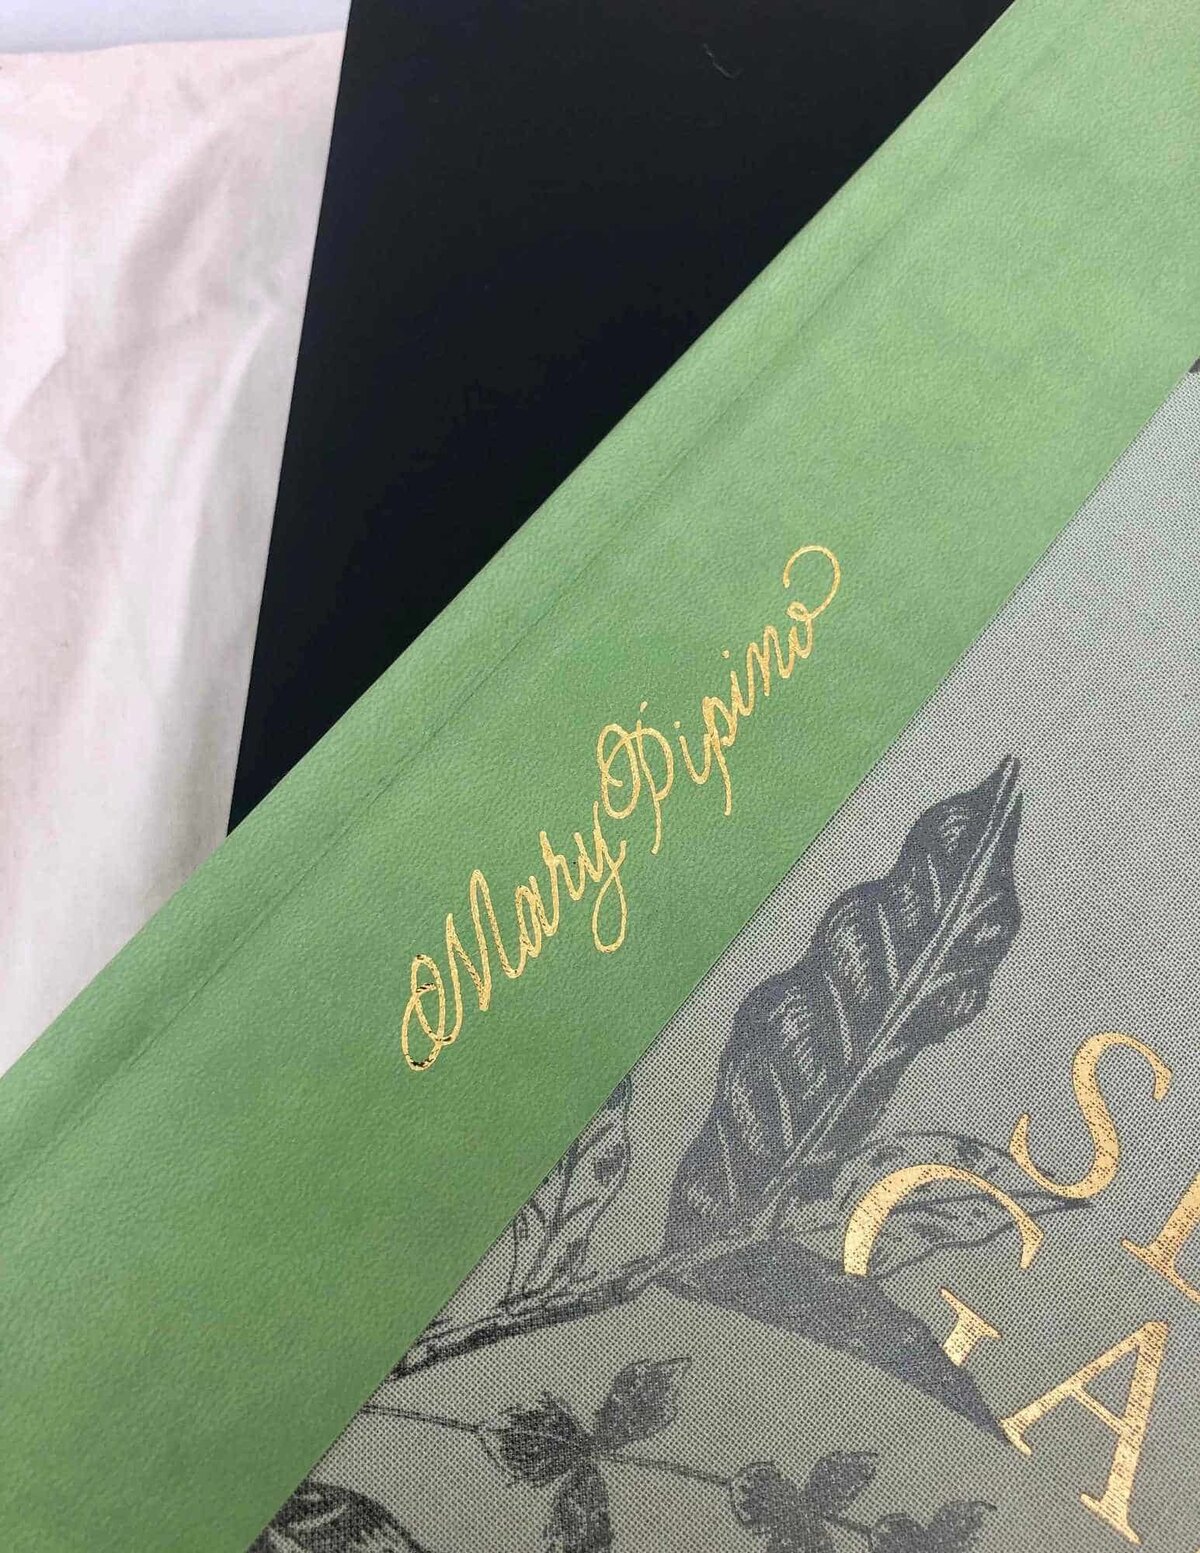 calligraphy name embossed in gold on a leather book cover